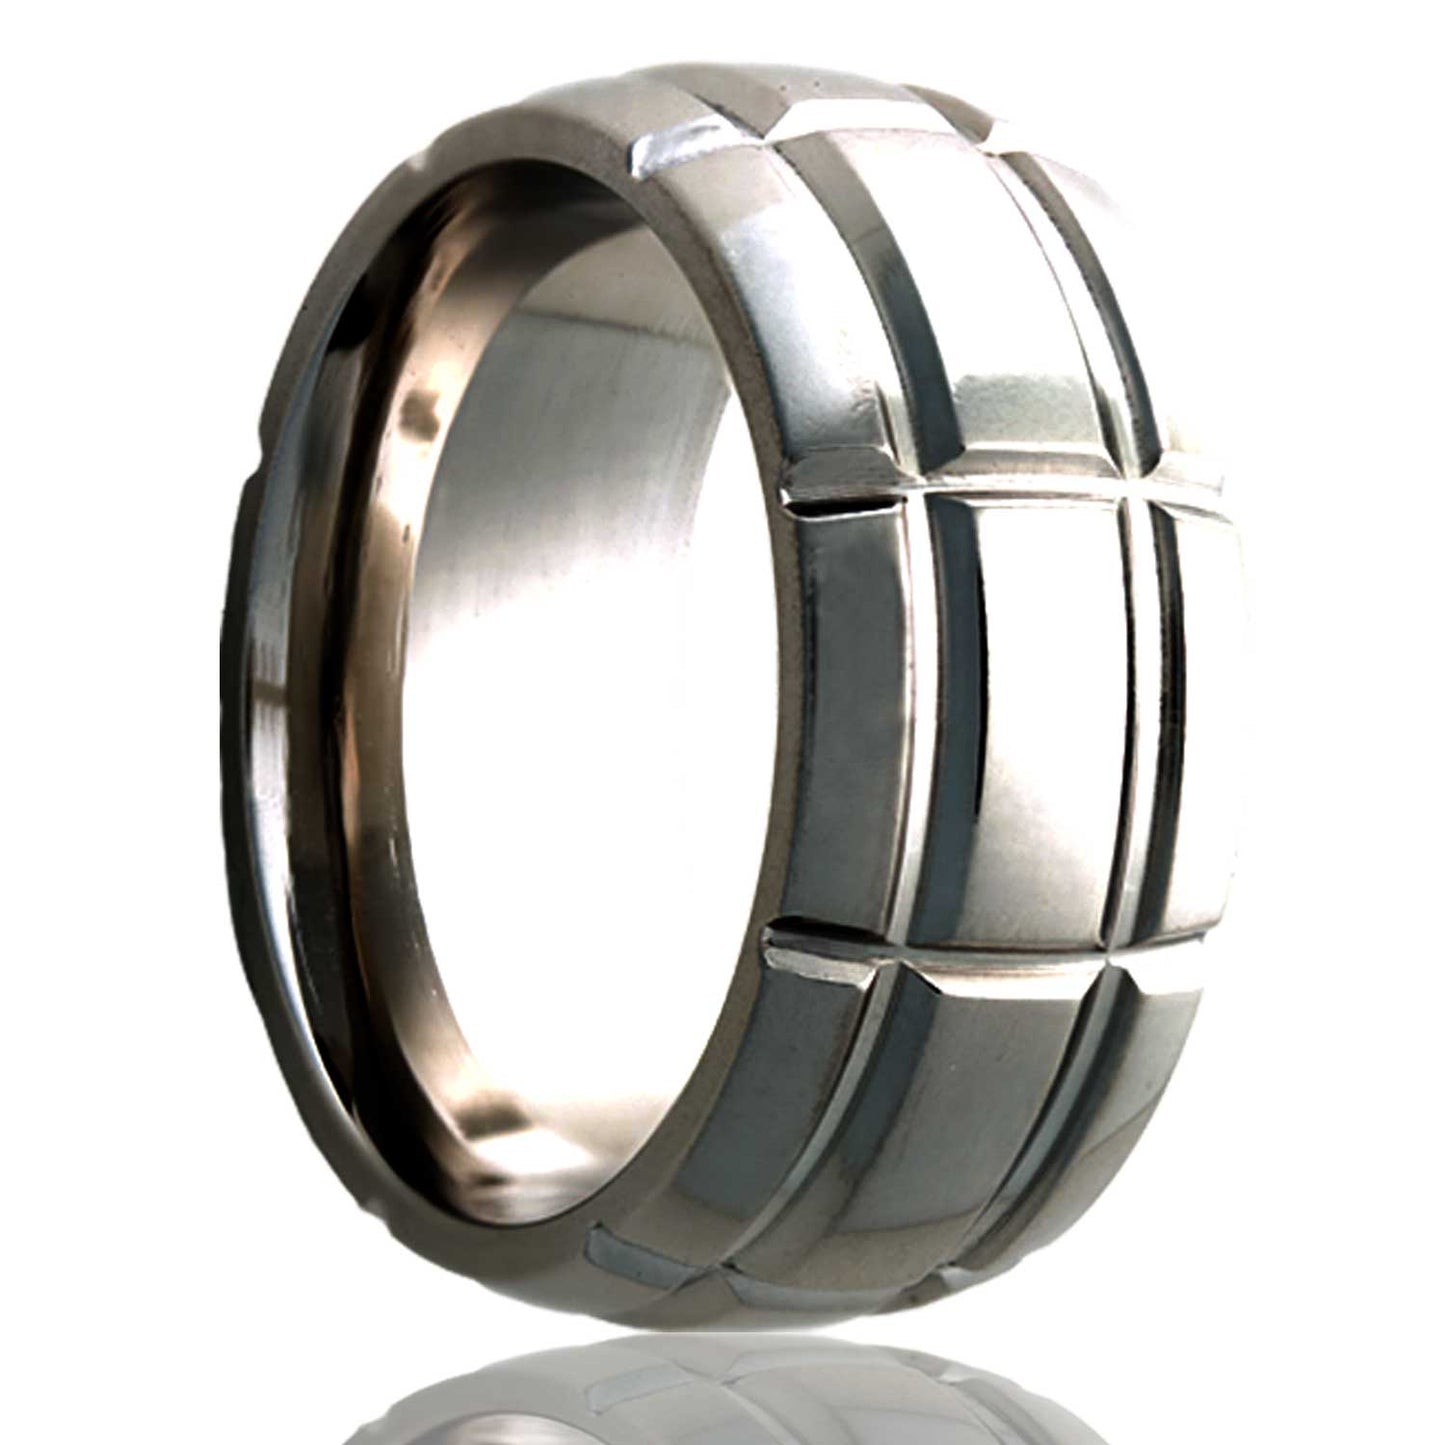 A intersecting groove pattern domed titanium wedding band displayed on a neutral white background.